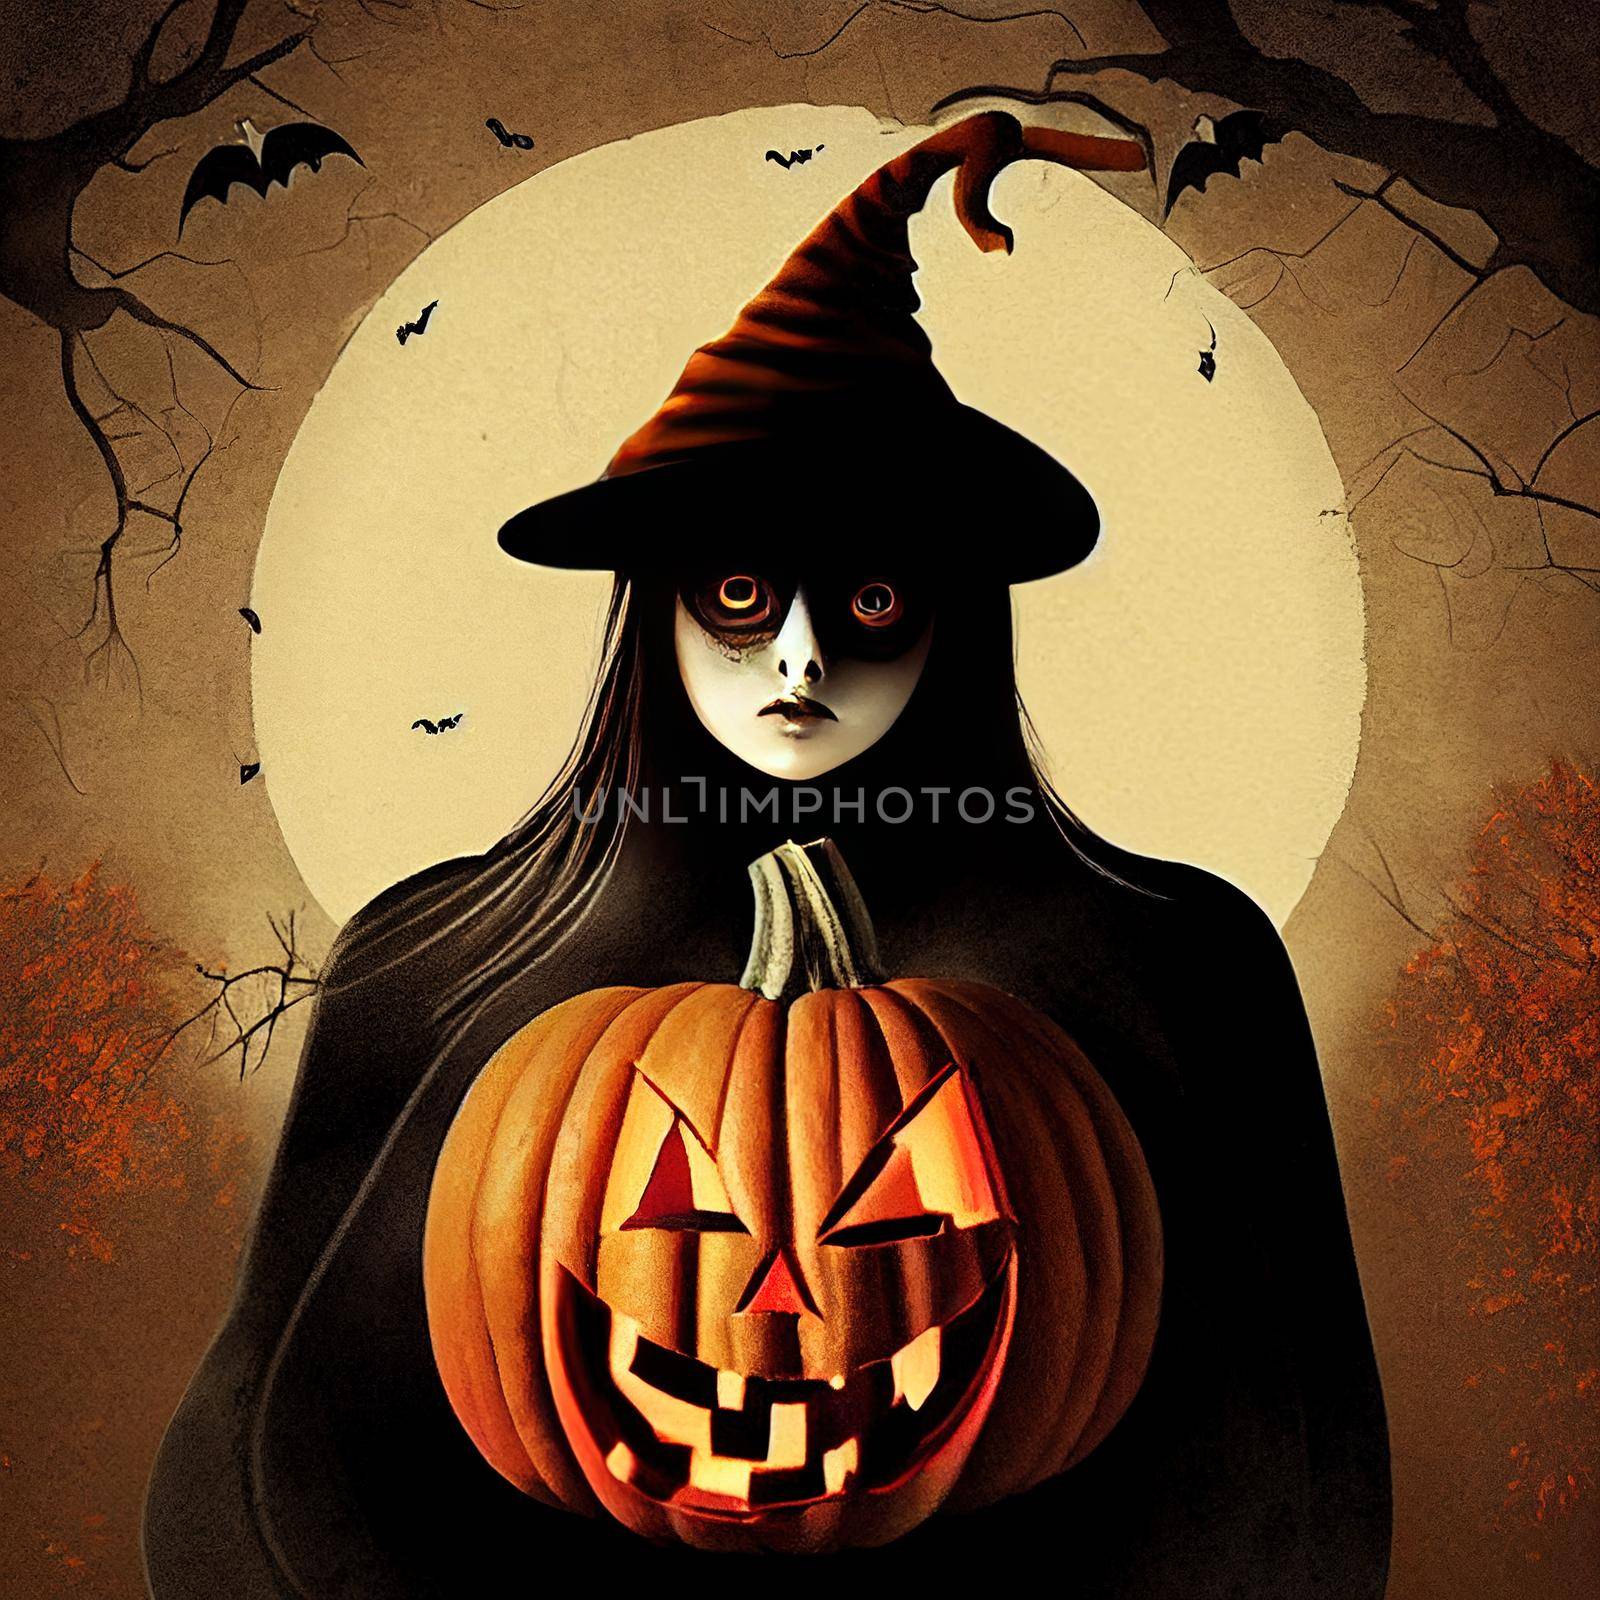 halloween witch orange pumpkin in hand, scary grungy style illustration by 2ragon